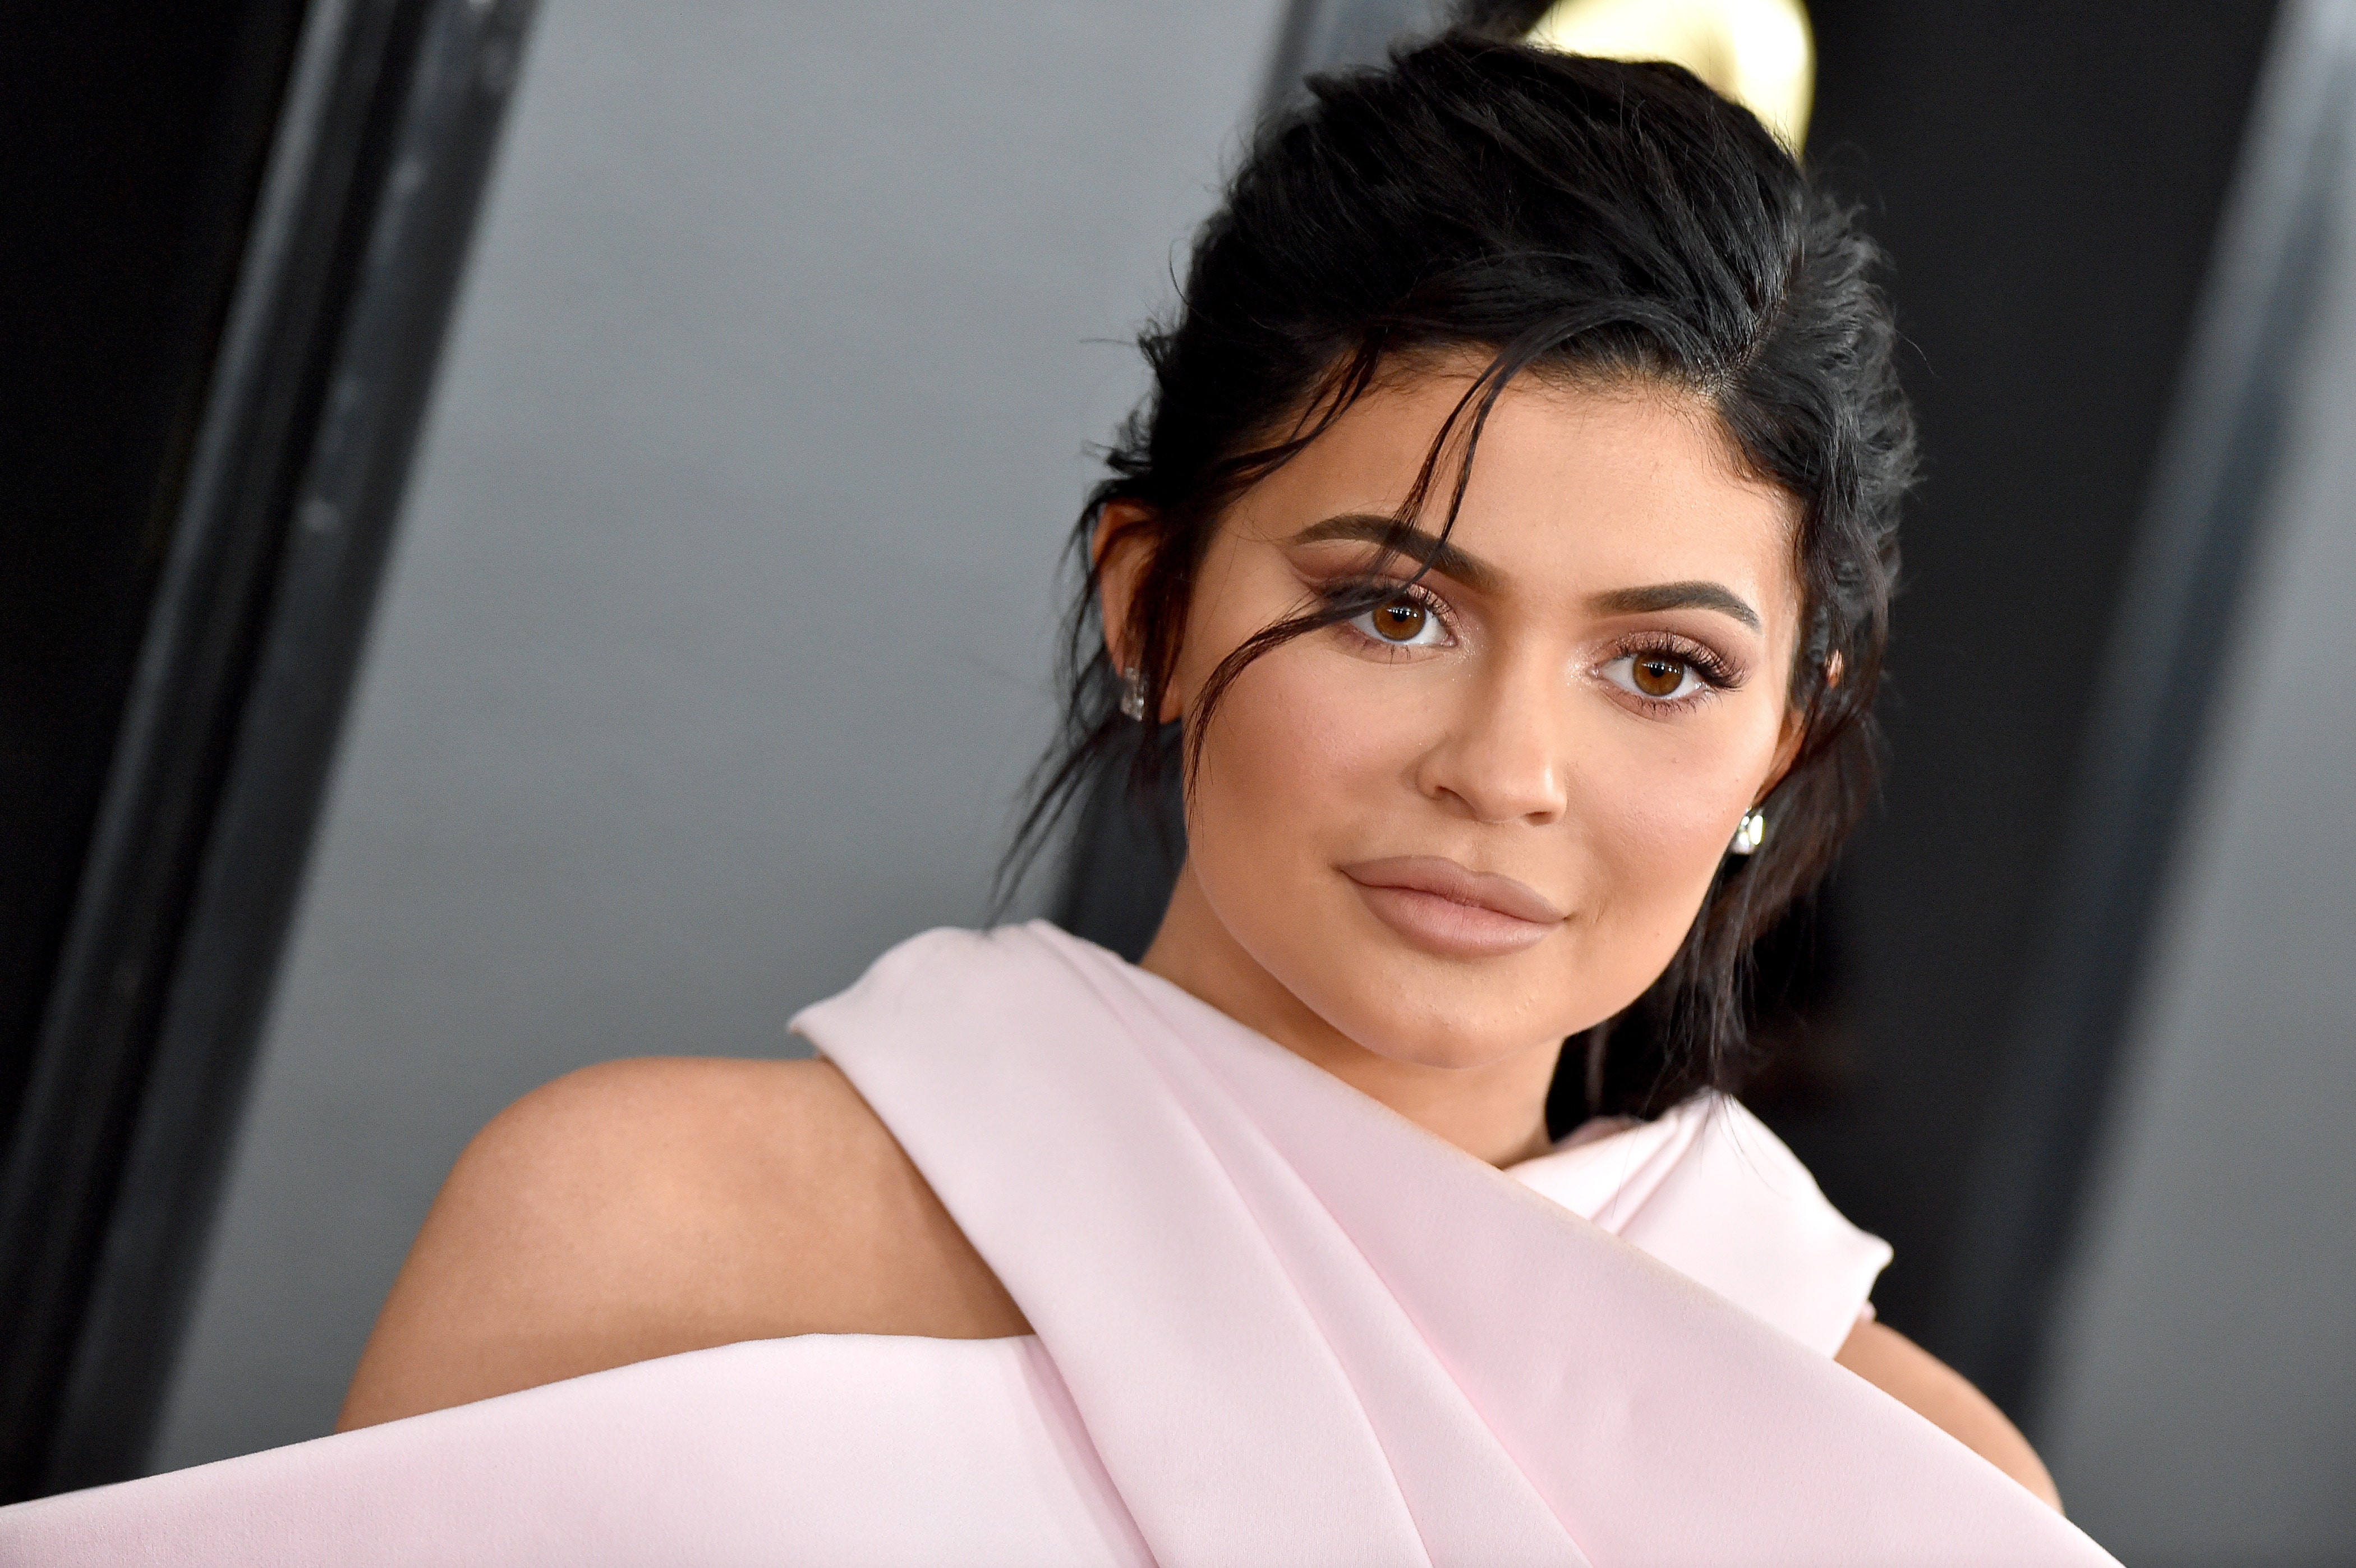 Kylie Jenner reacts to setback after asking her fans to make a donation to the GoFundMe of the injured makeup artist